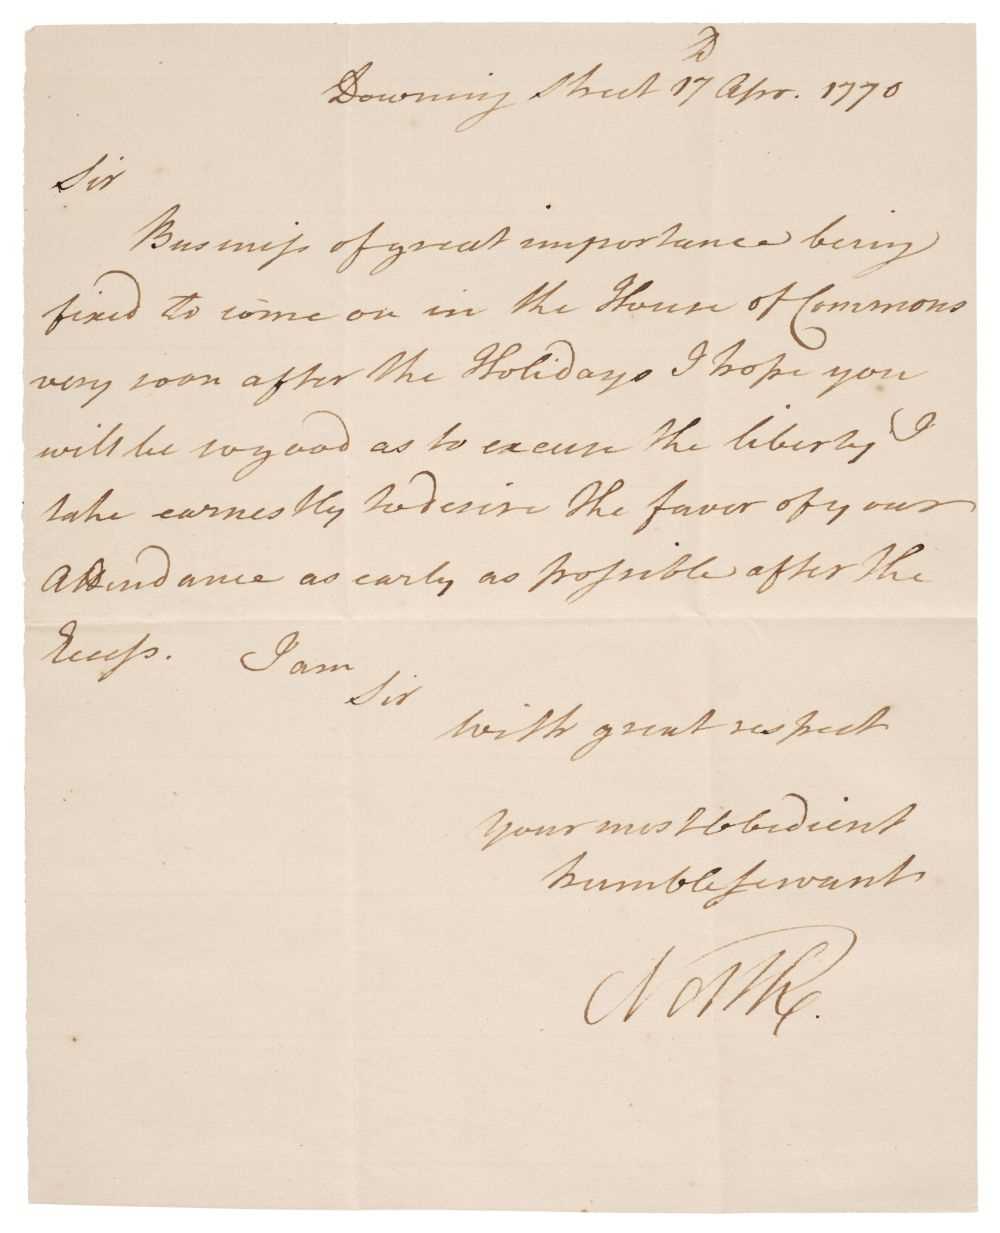 Lot 165 - North (Lord, 1732-1792), Letter Signed, ‘North’, as Prime Minister, Downing Street, 17 April 1770